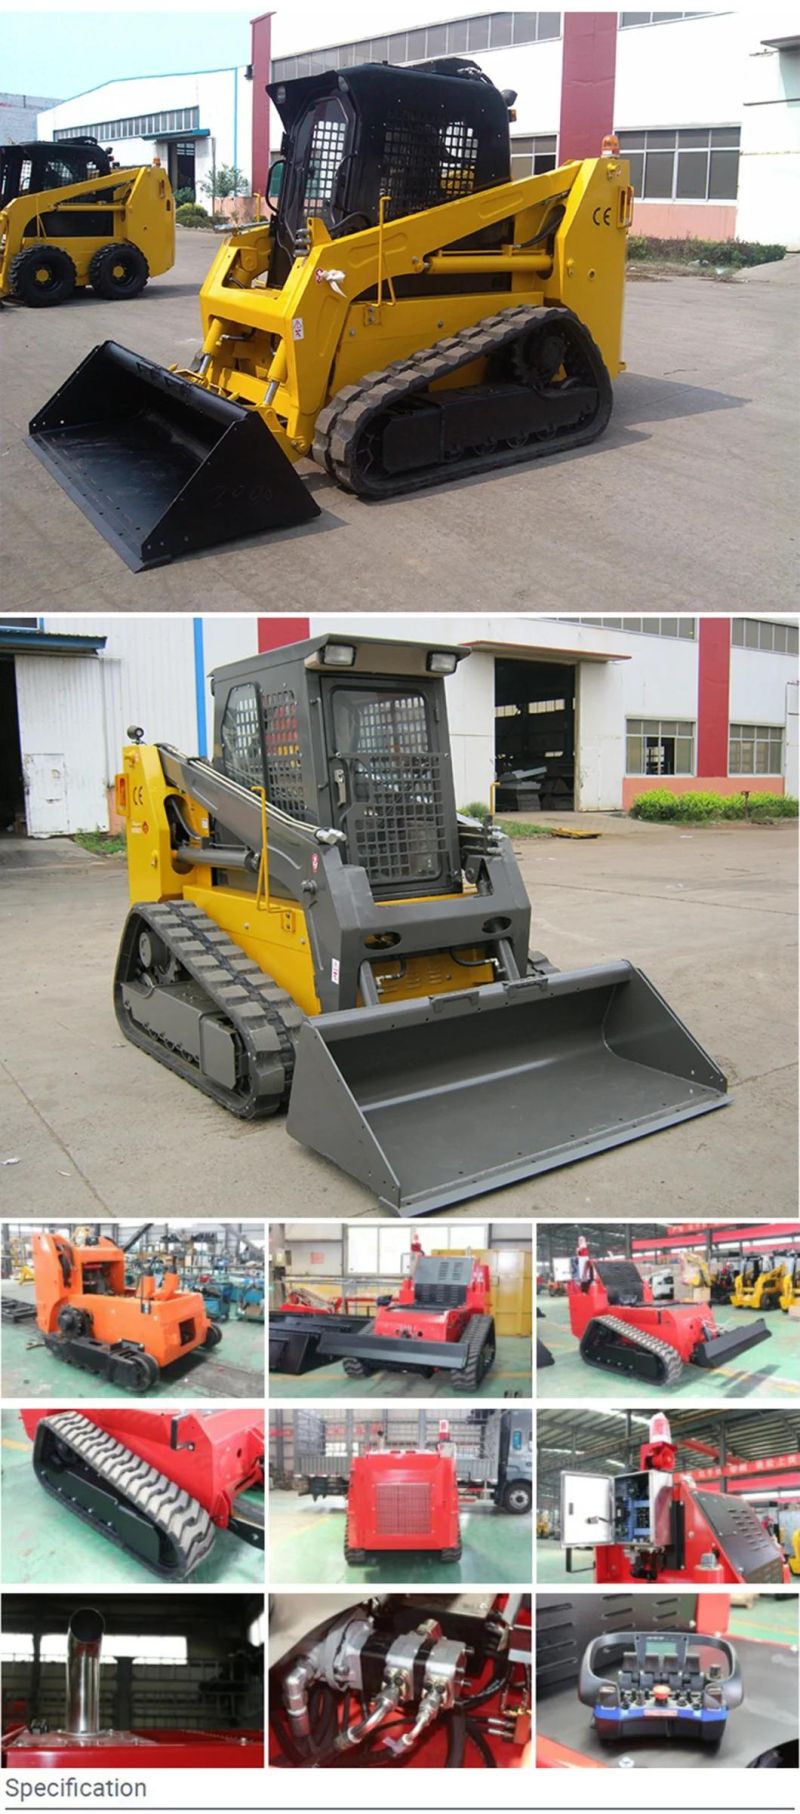 Mini Forestry Mulcher Crawler Skid Steer Loader with Multifunction